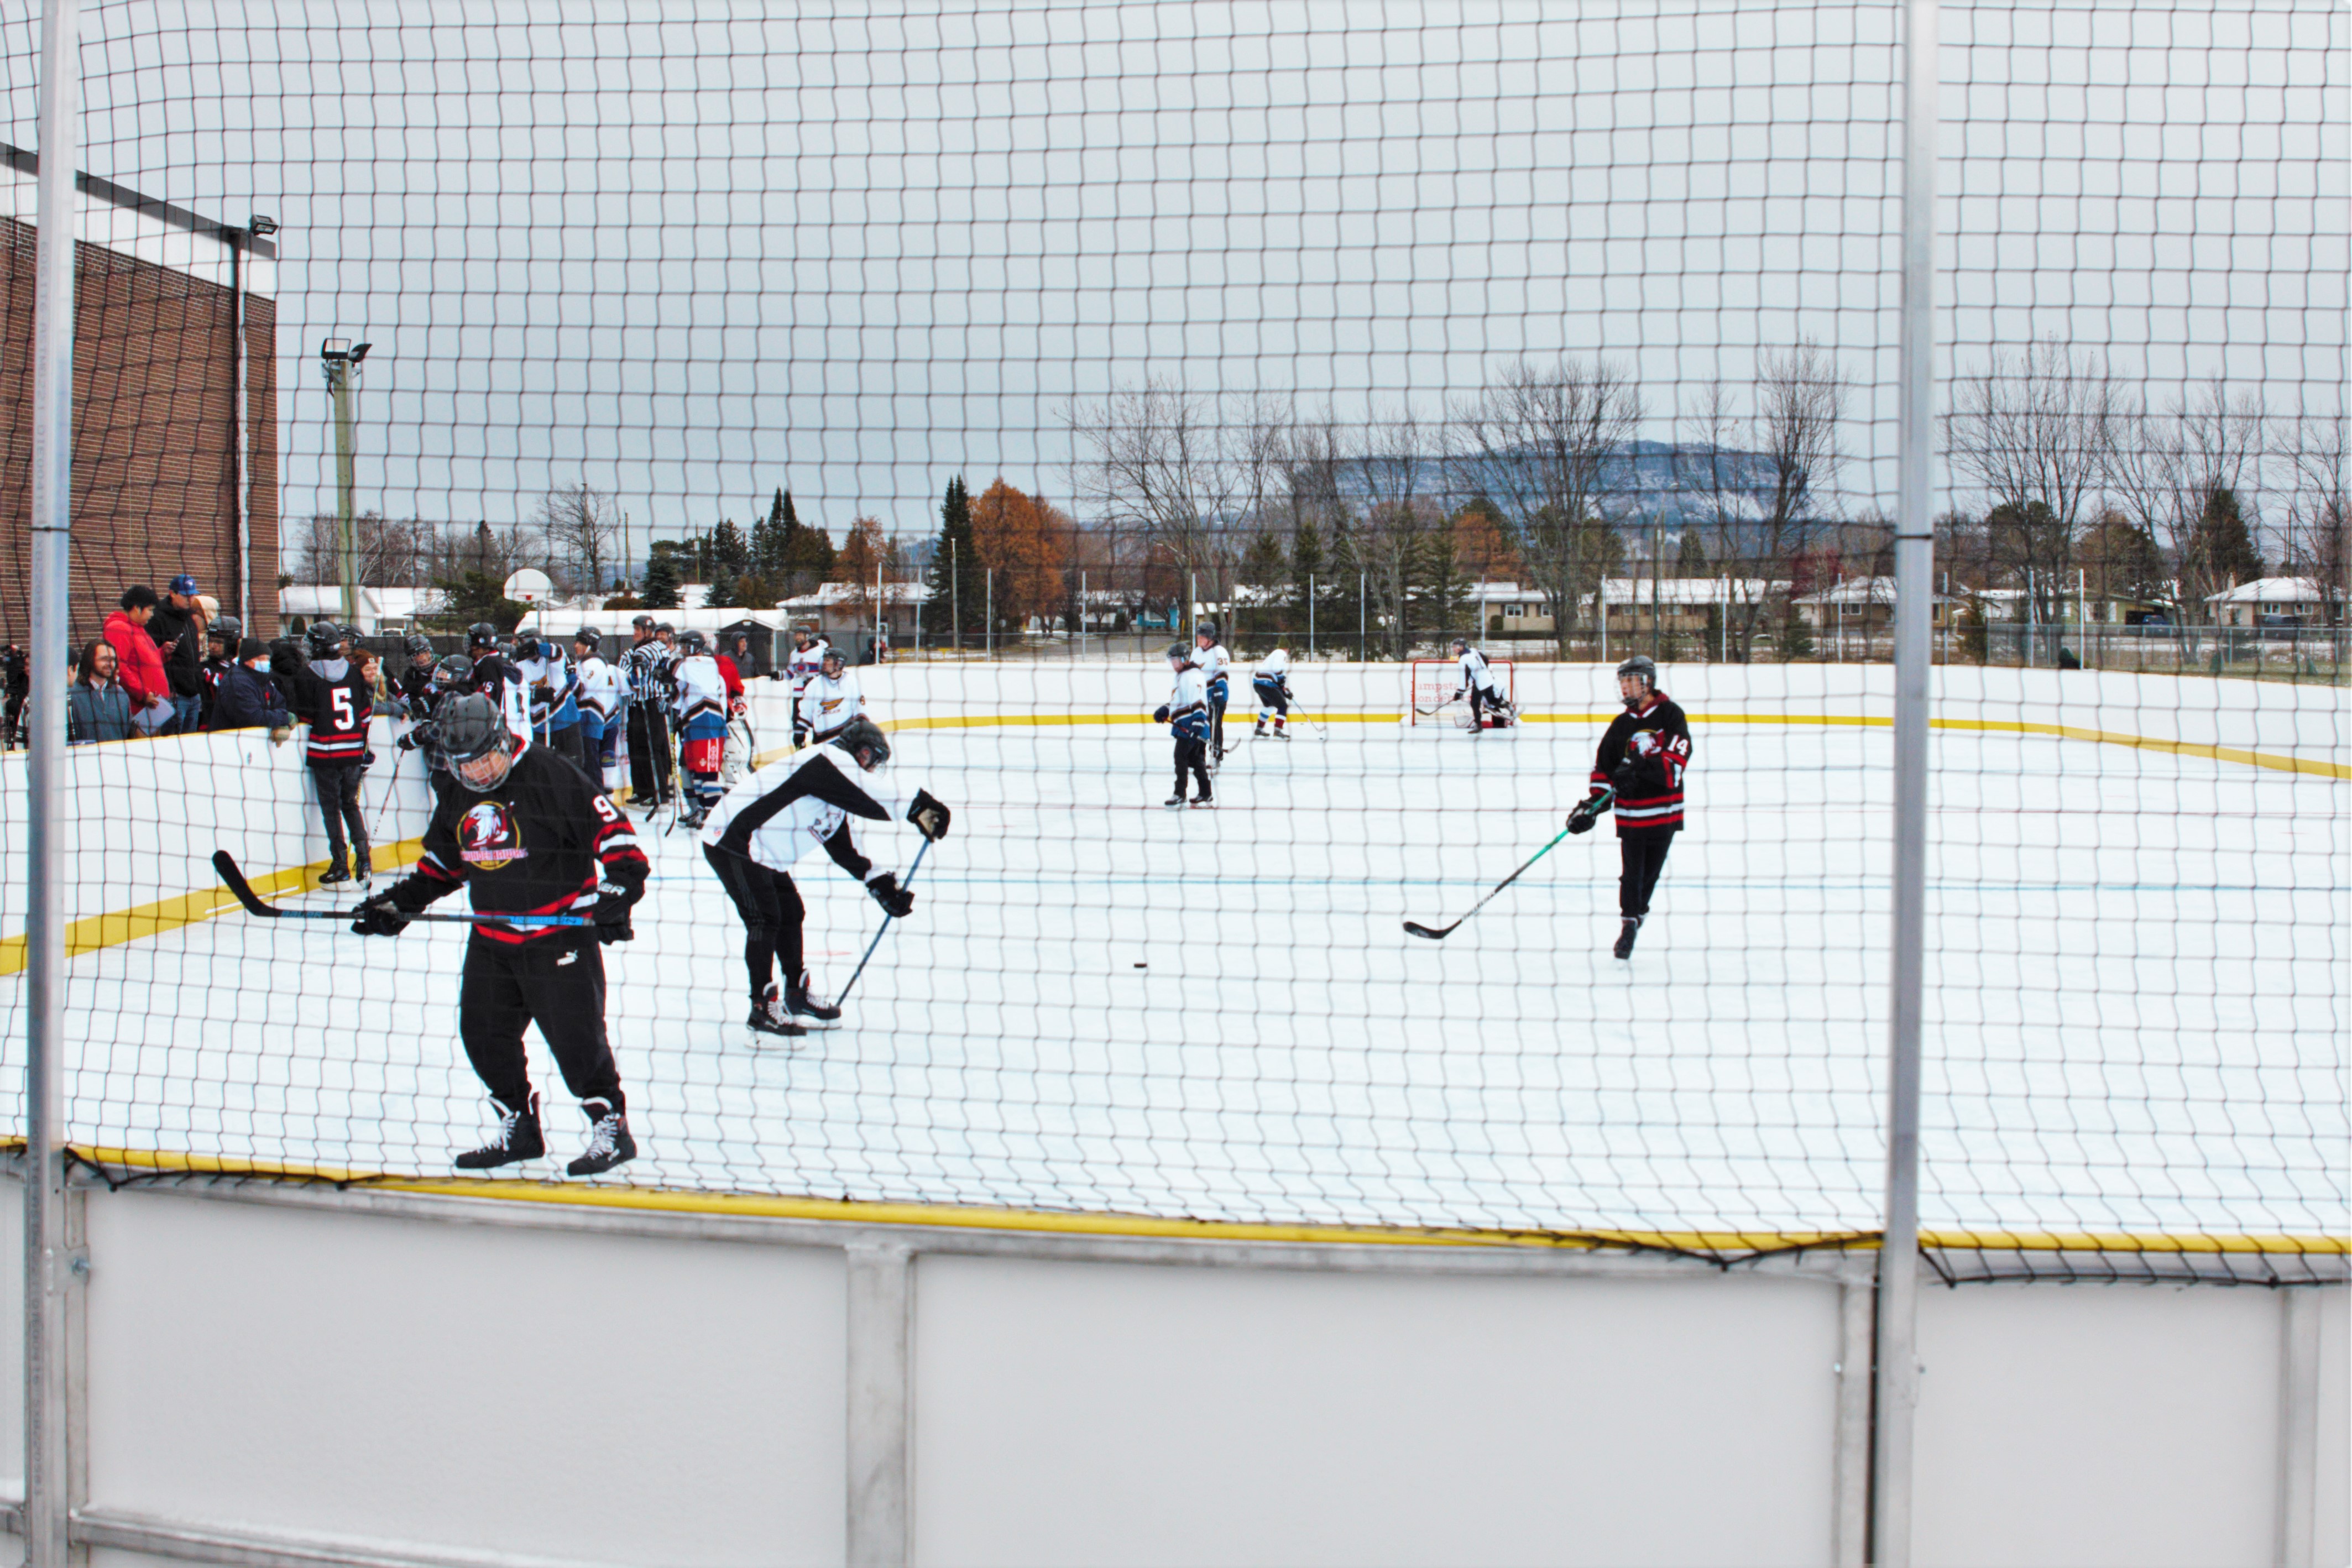 Year-round rink means opportunities for DFC students